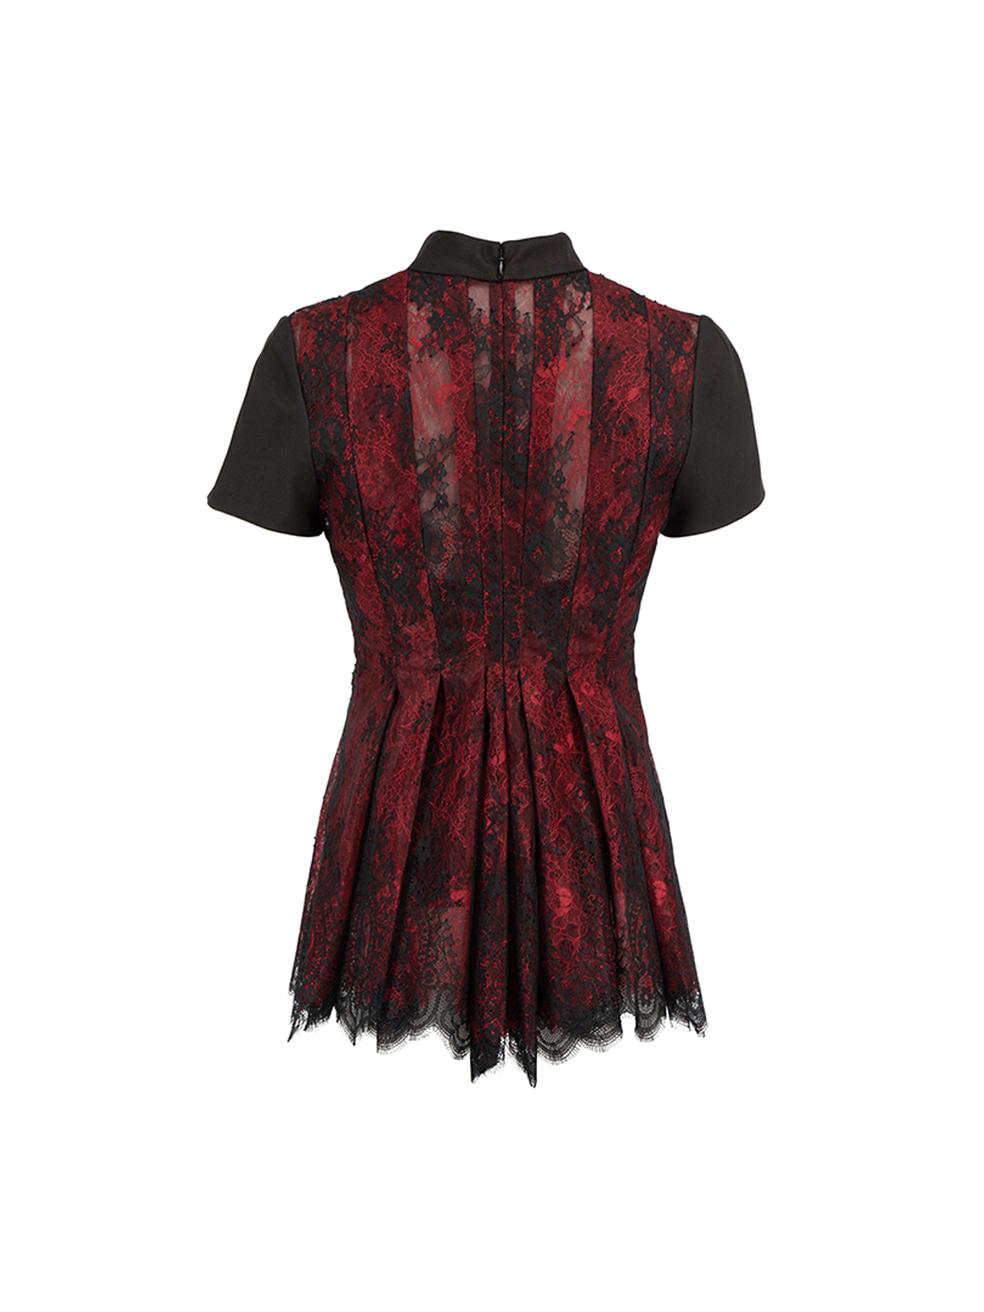 Black Alexander McQueen Women's McQ by Alexander McQueen Red Floral Lace Blouse